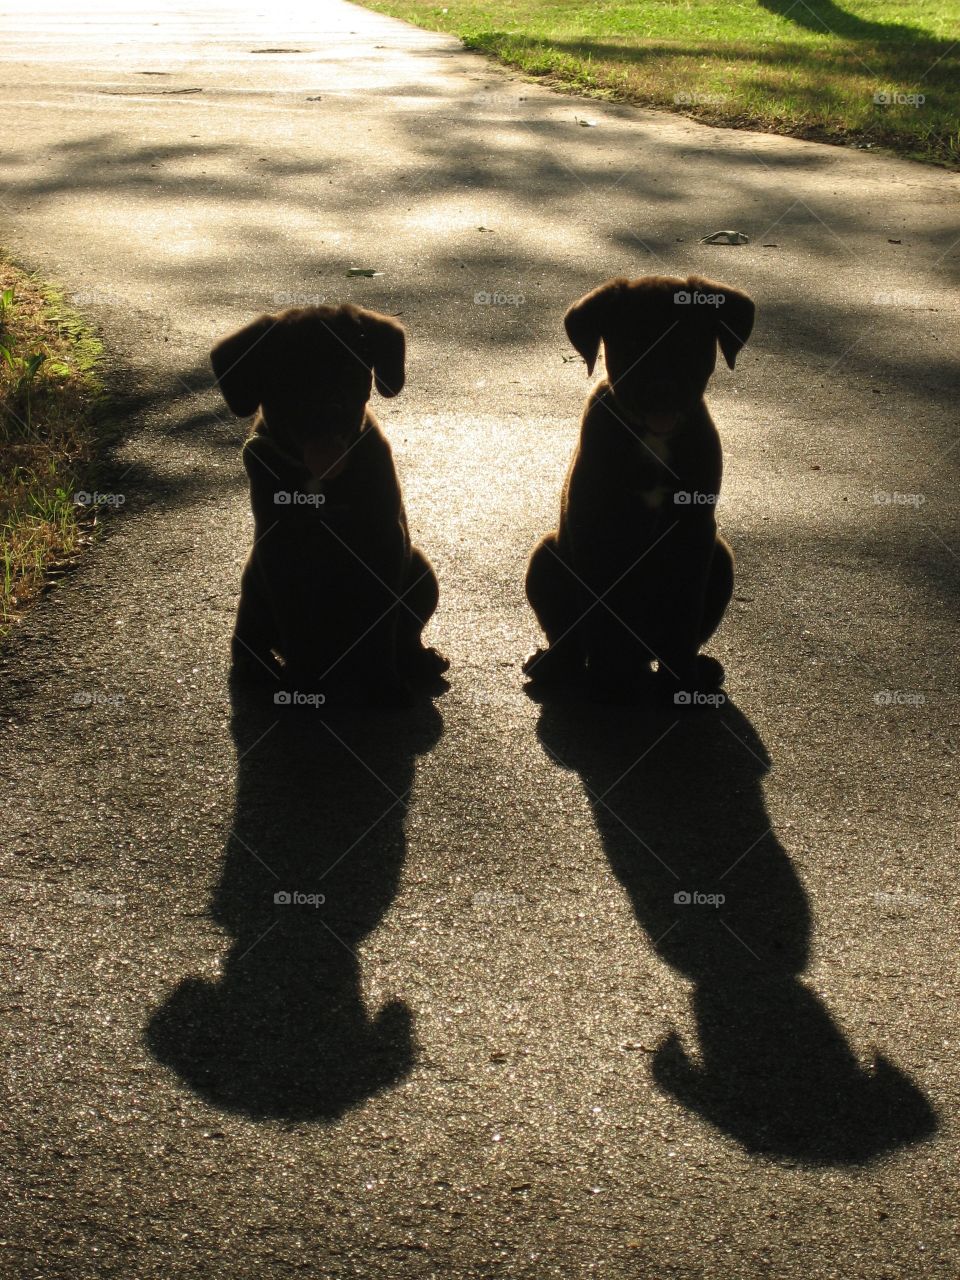 2 black lab puppies cast long shadows as they patiently practice their training and wait to be called. 